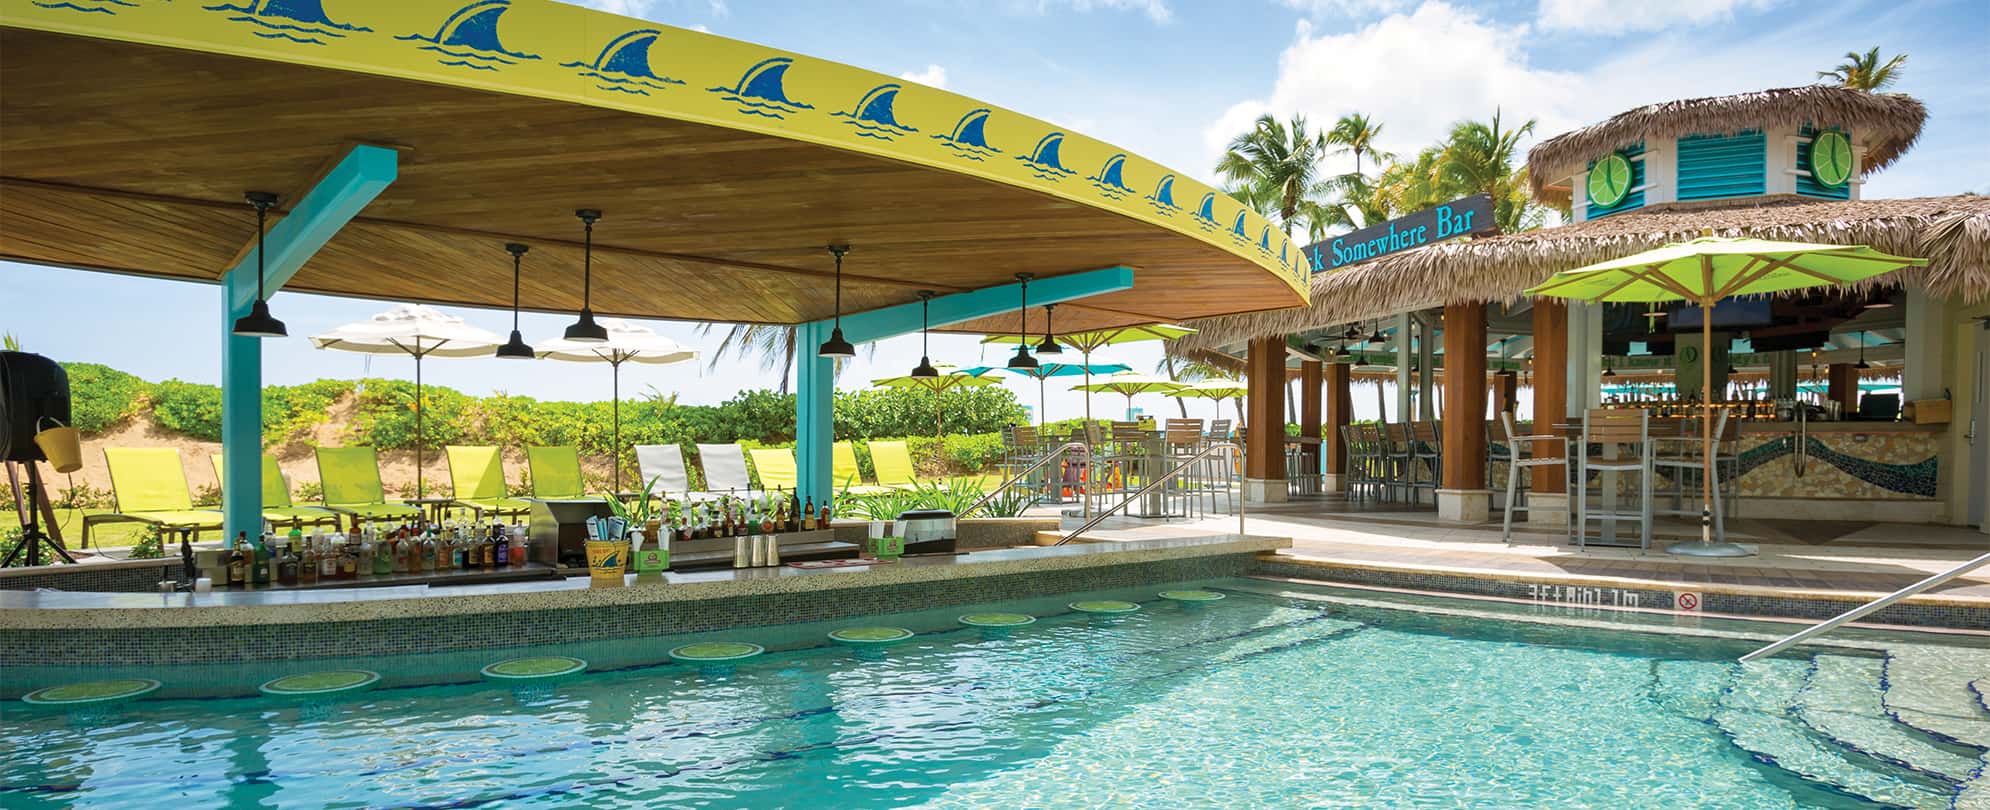 A swim-up bar with the Landshark logo at the pool of Margaritaville Vacation Club by Wyndham - Rio Mar.